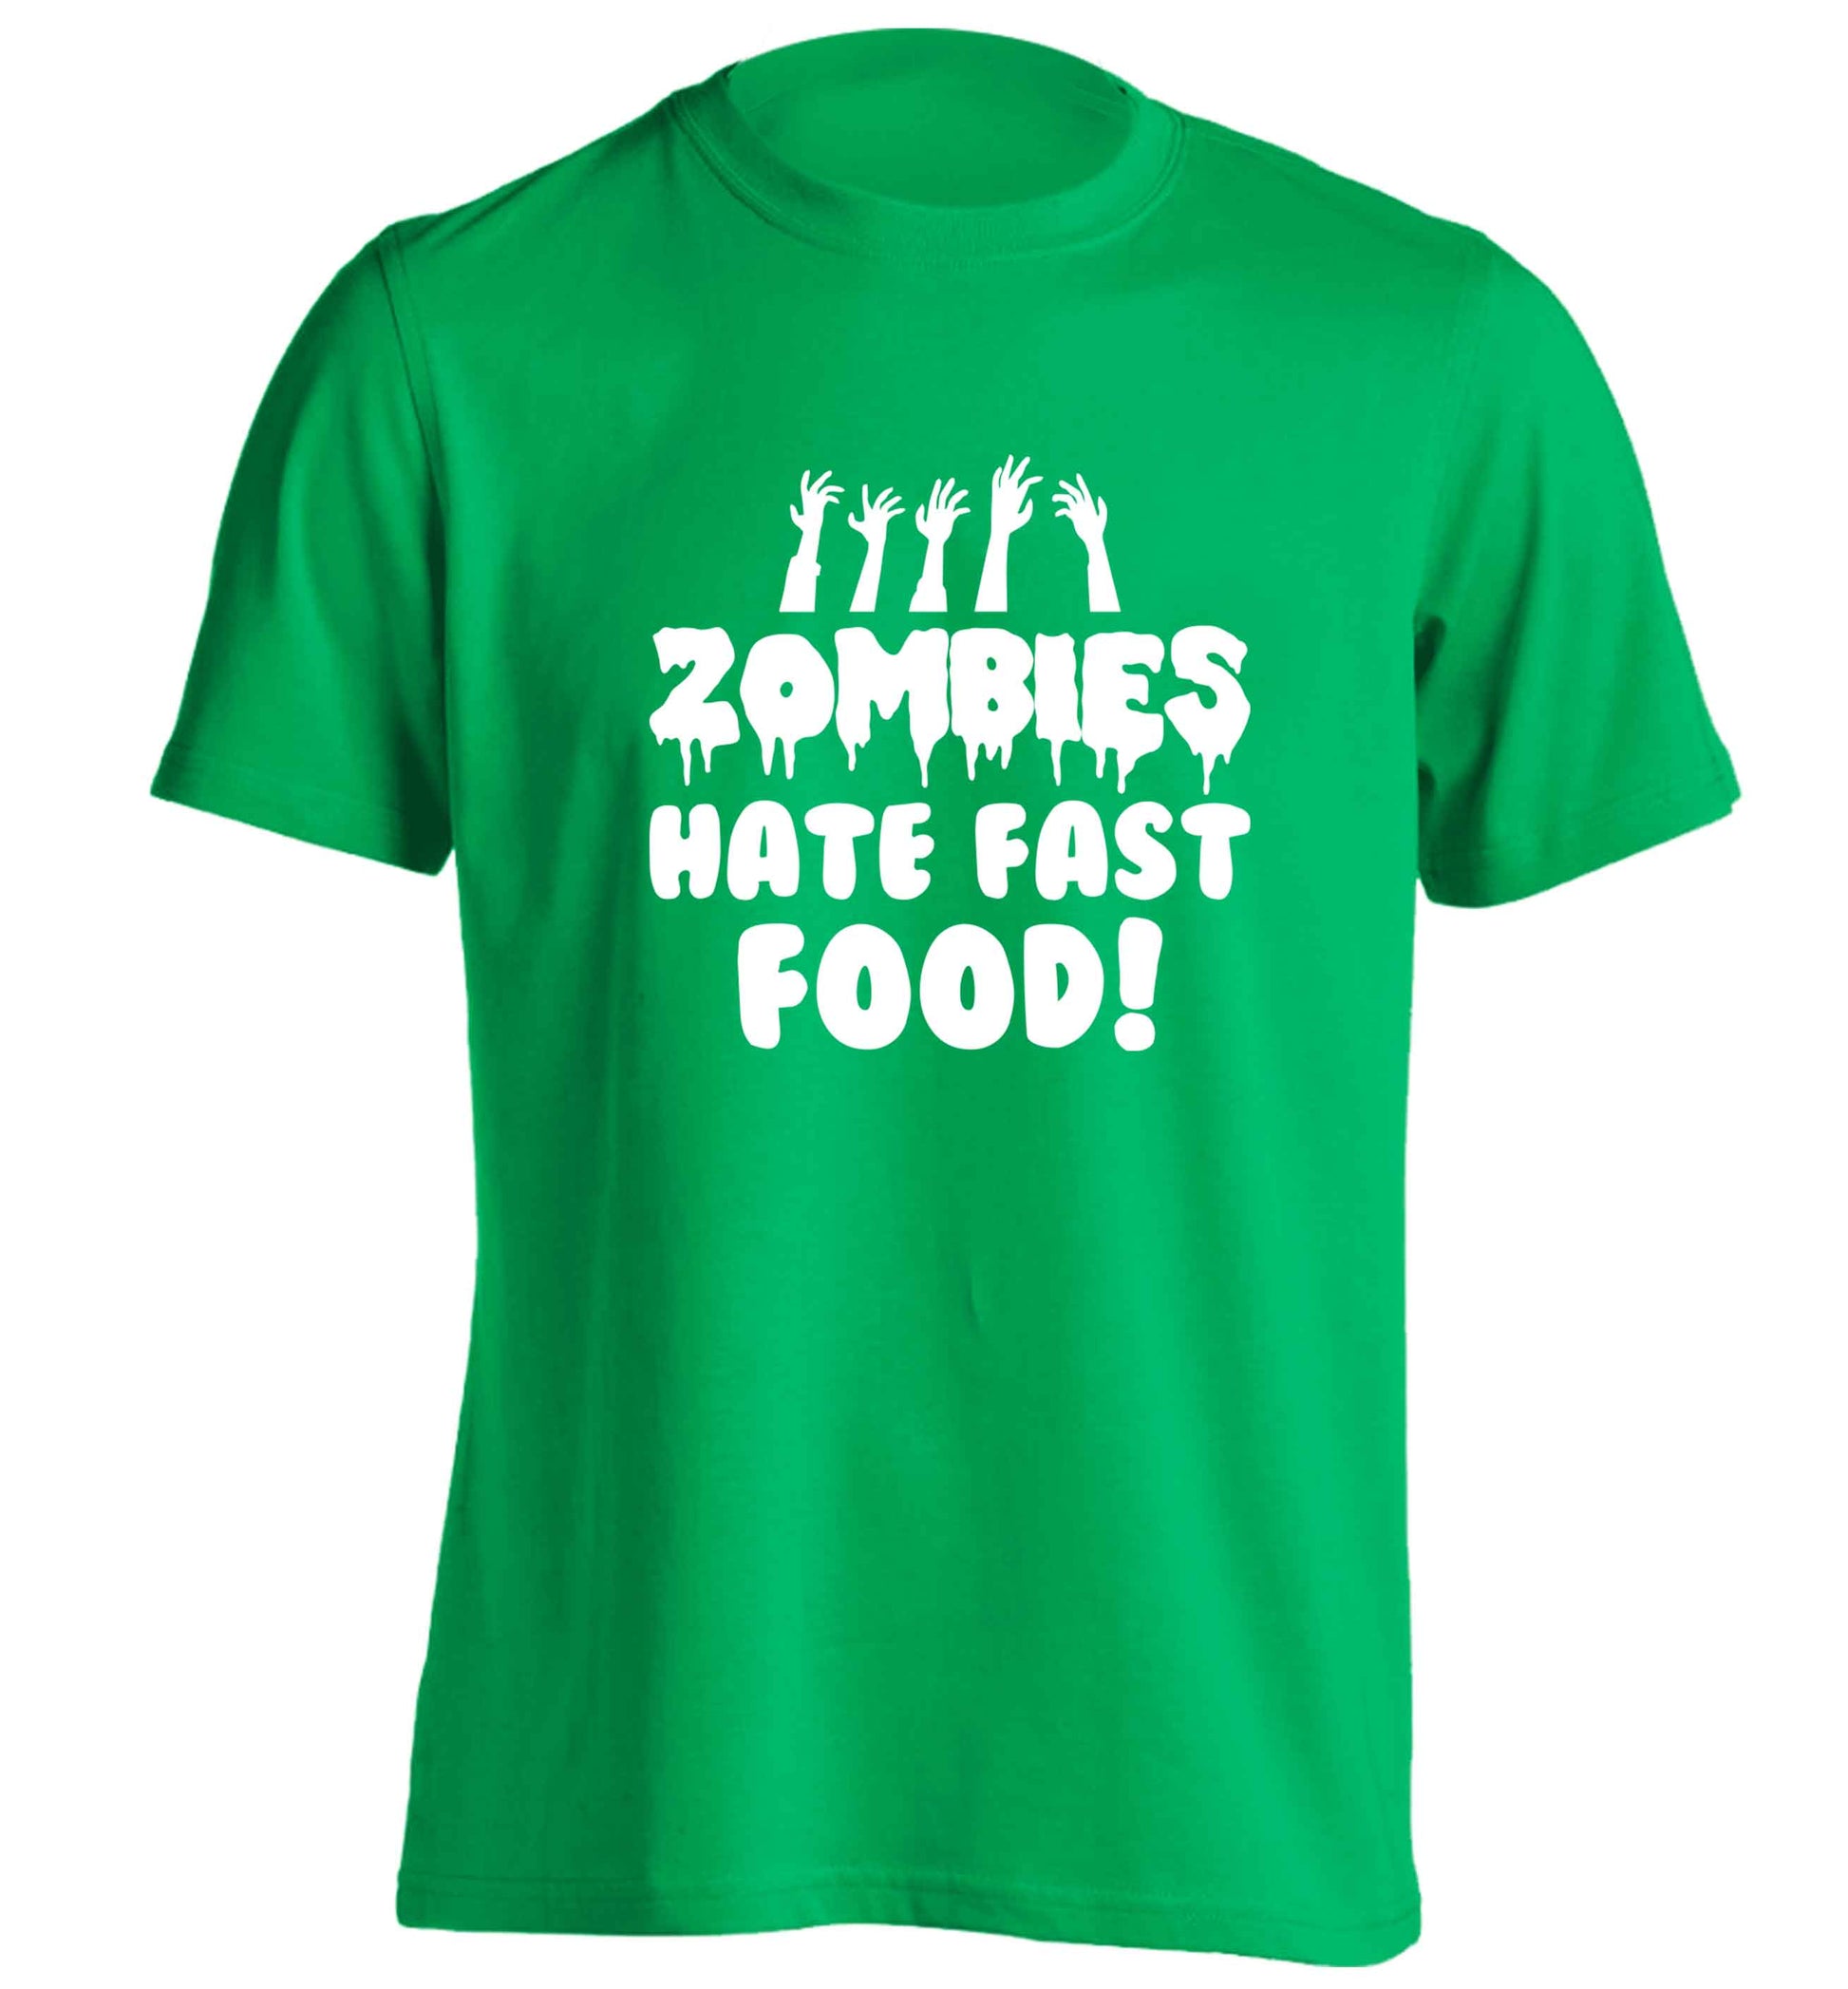 Zombies hate fast food adults unisex green Tshirt 2XL